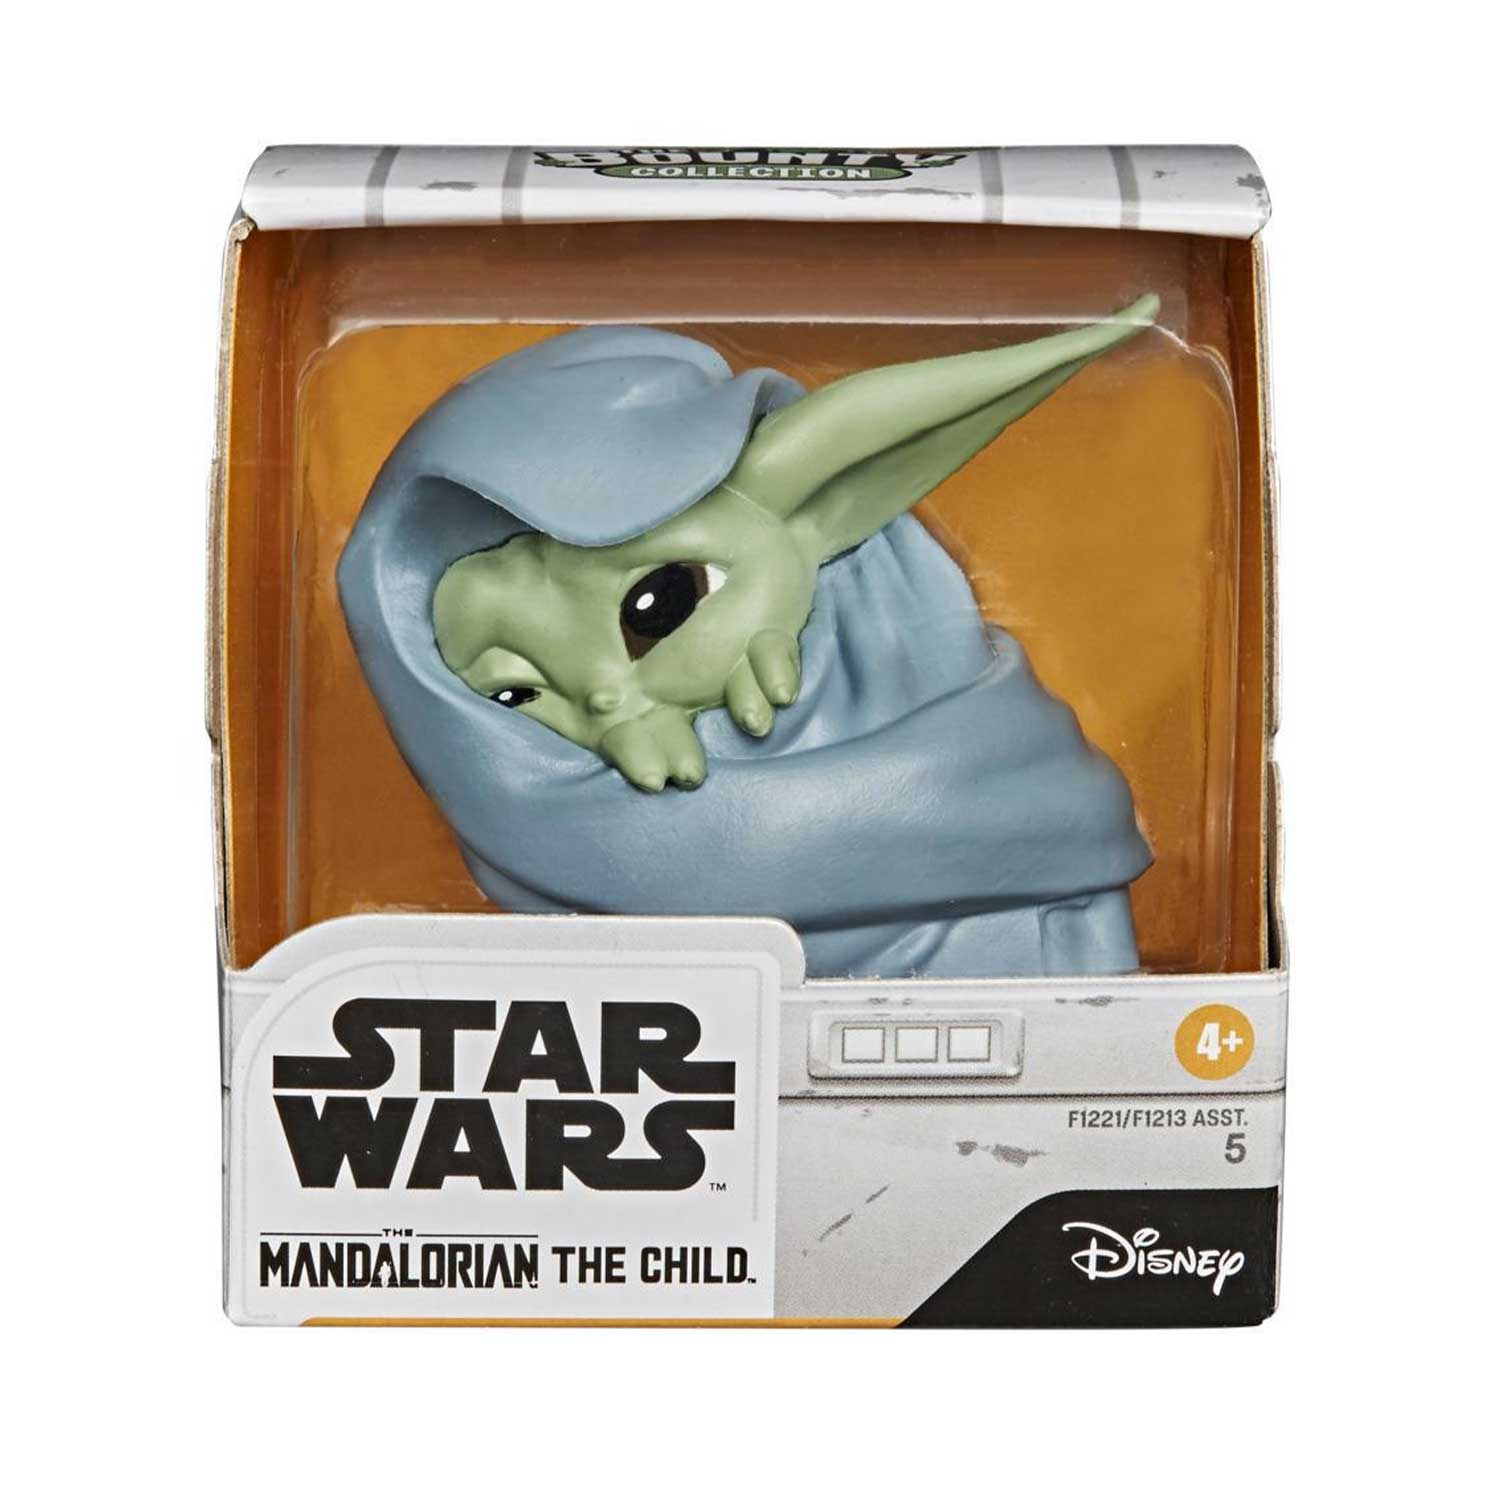 Star Wars The Bounty Collection The Child Collectible Toy 2.2-Inch The Mandalorian “Baby Yoda” Blanket-Wrapped Pose Toy - Mod: HSBF12215L0